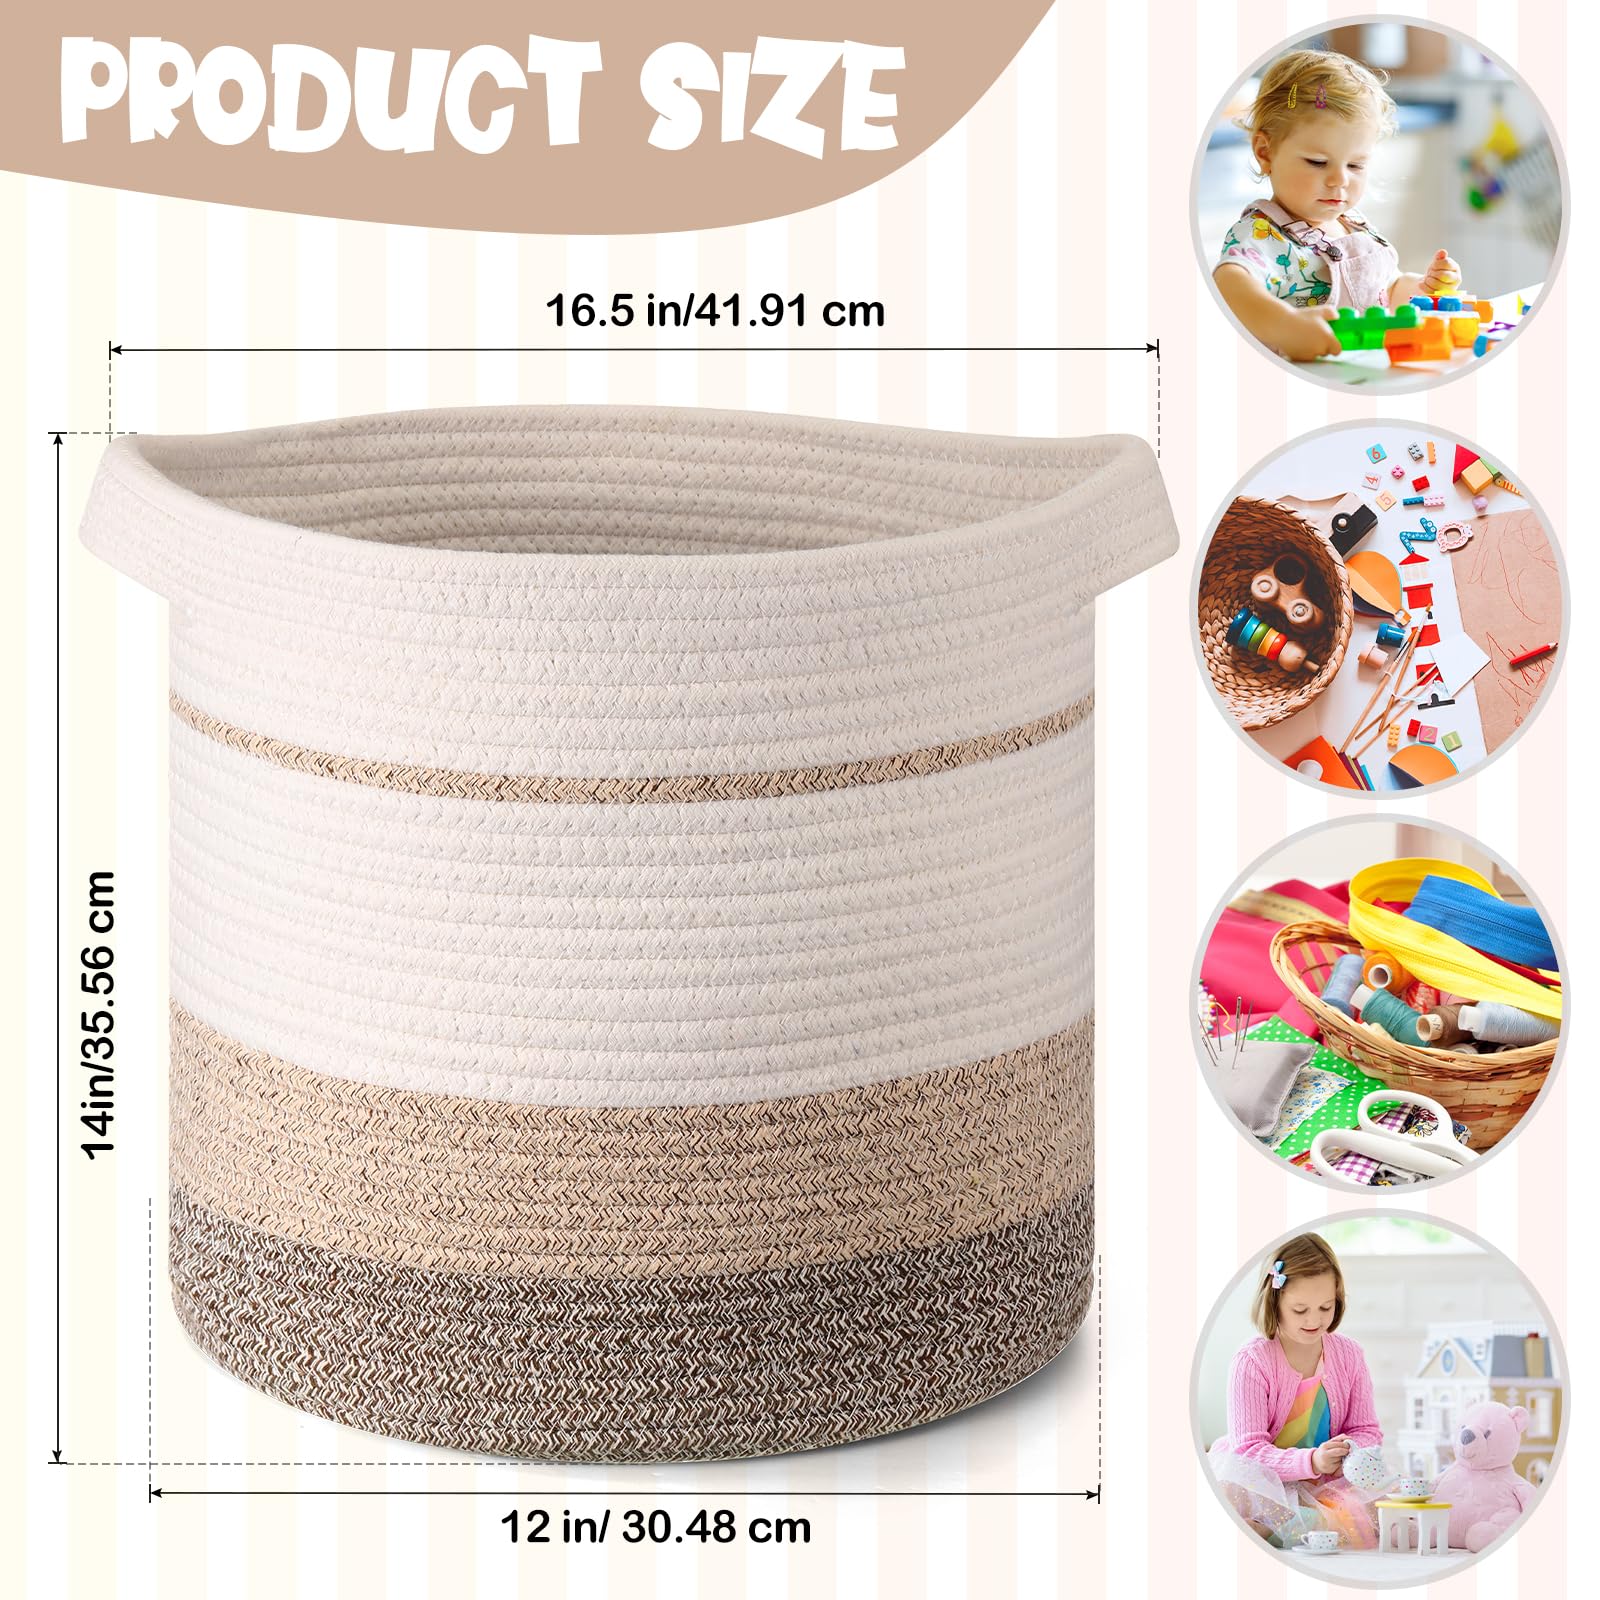 4 Pack Cotton Rope Basket 14 x 12 Inch Woven Storage Basket Baby Blanket Laundry Basket Kids Toy Baskets Hamper with Handles Decorative for Nursery Pillows Cloth Organizing Shelf Toy Storage